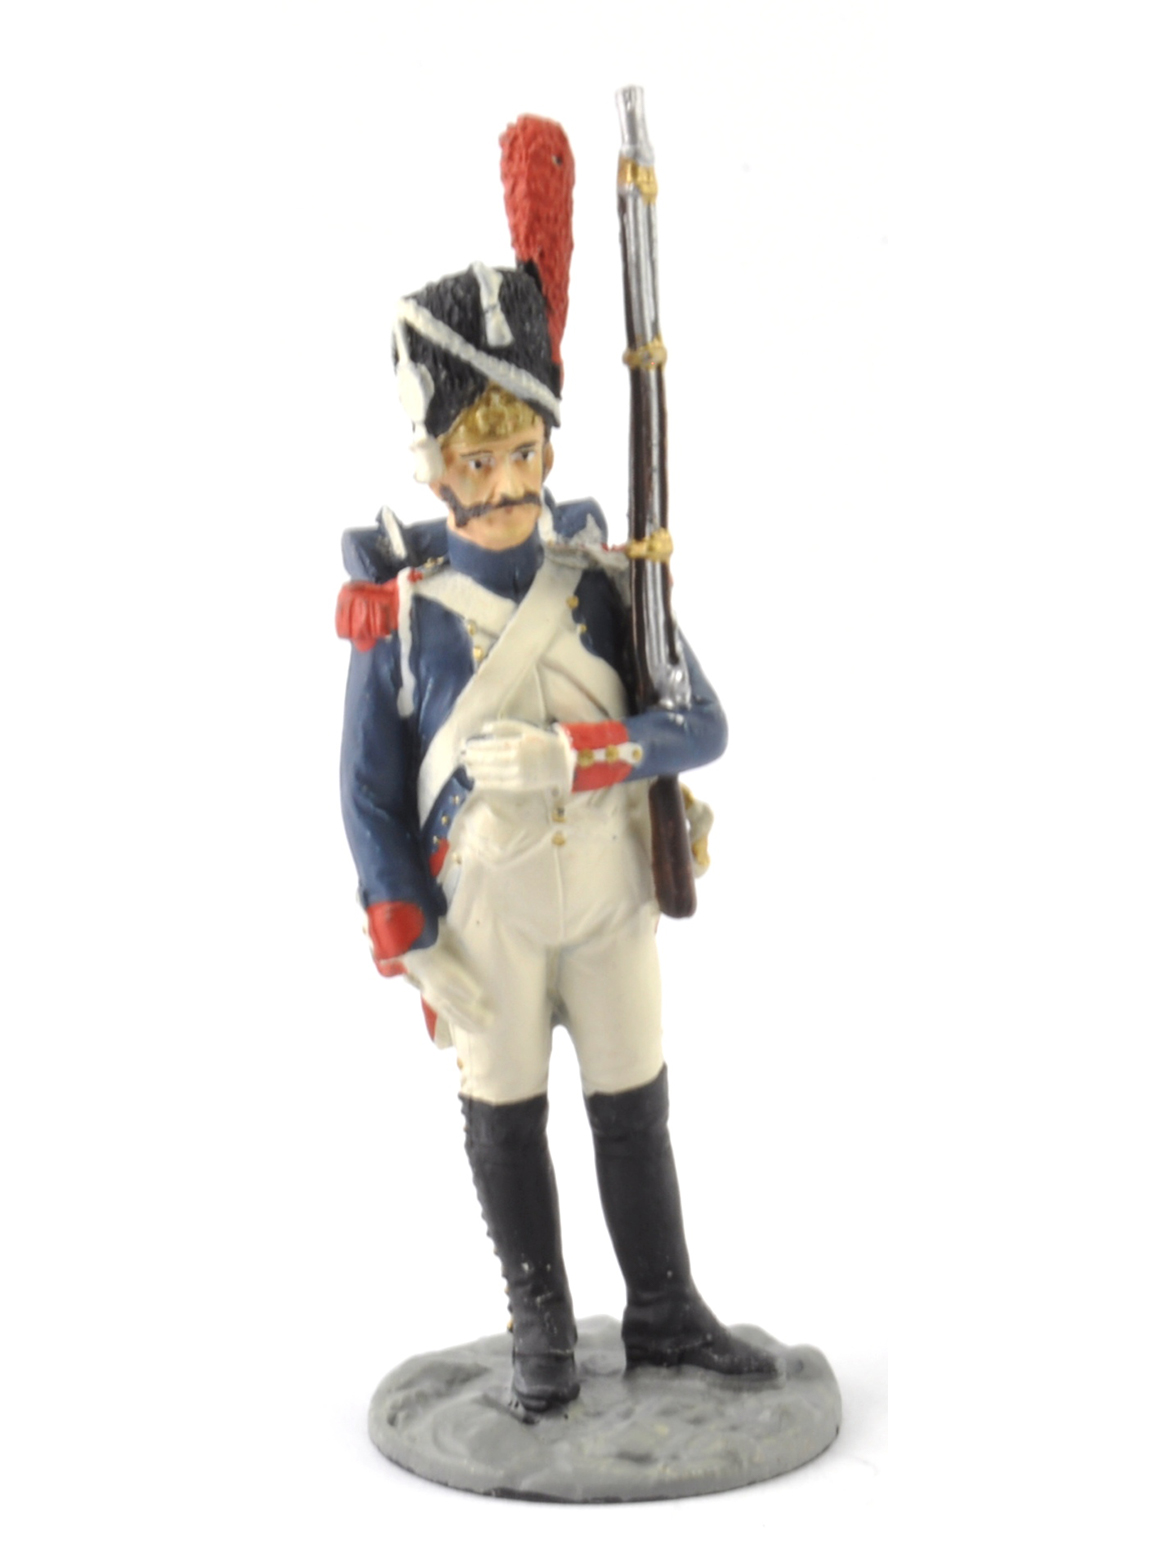 Private of 1st Infantry Division, Grenadier of Imperial Army, 1812